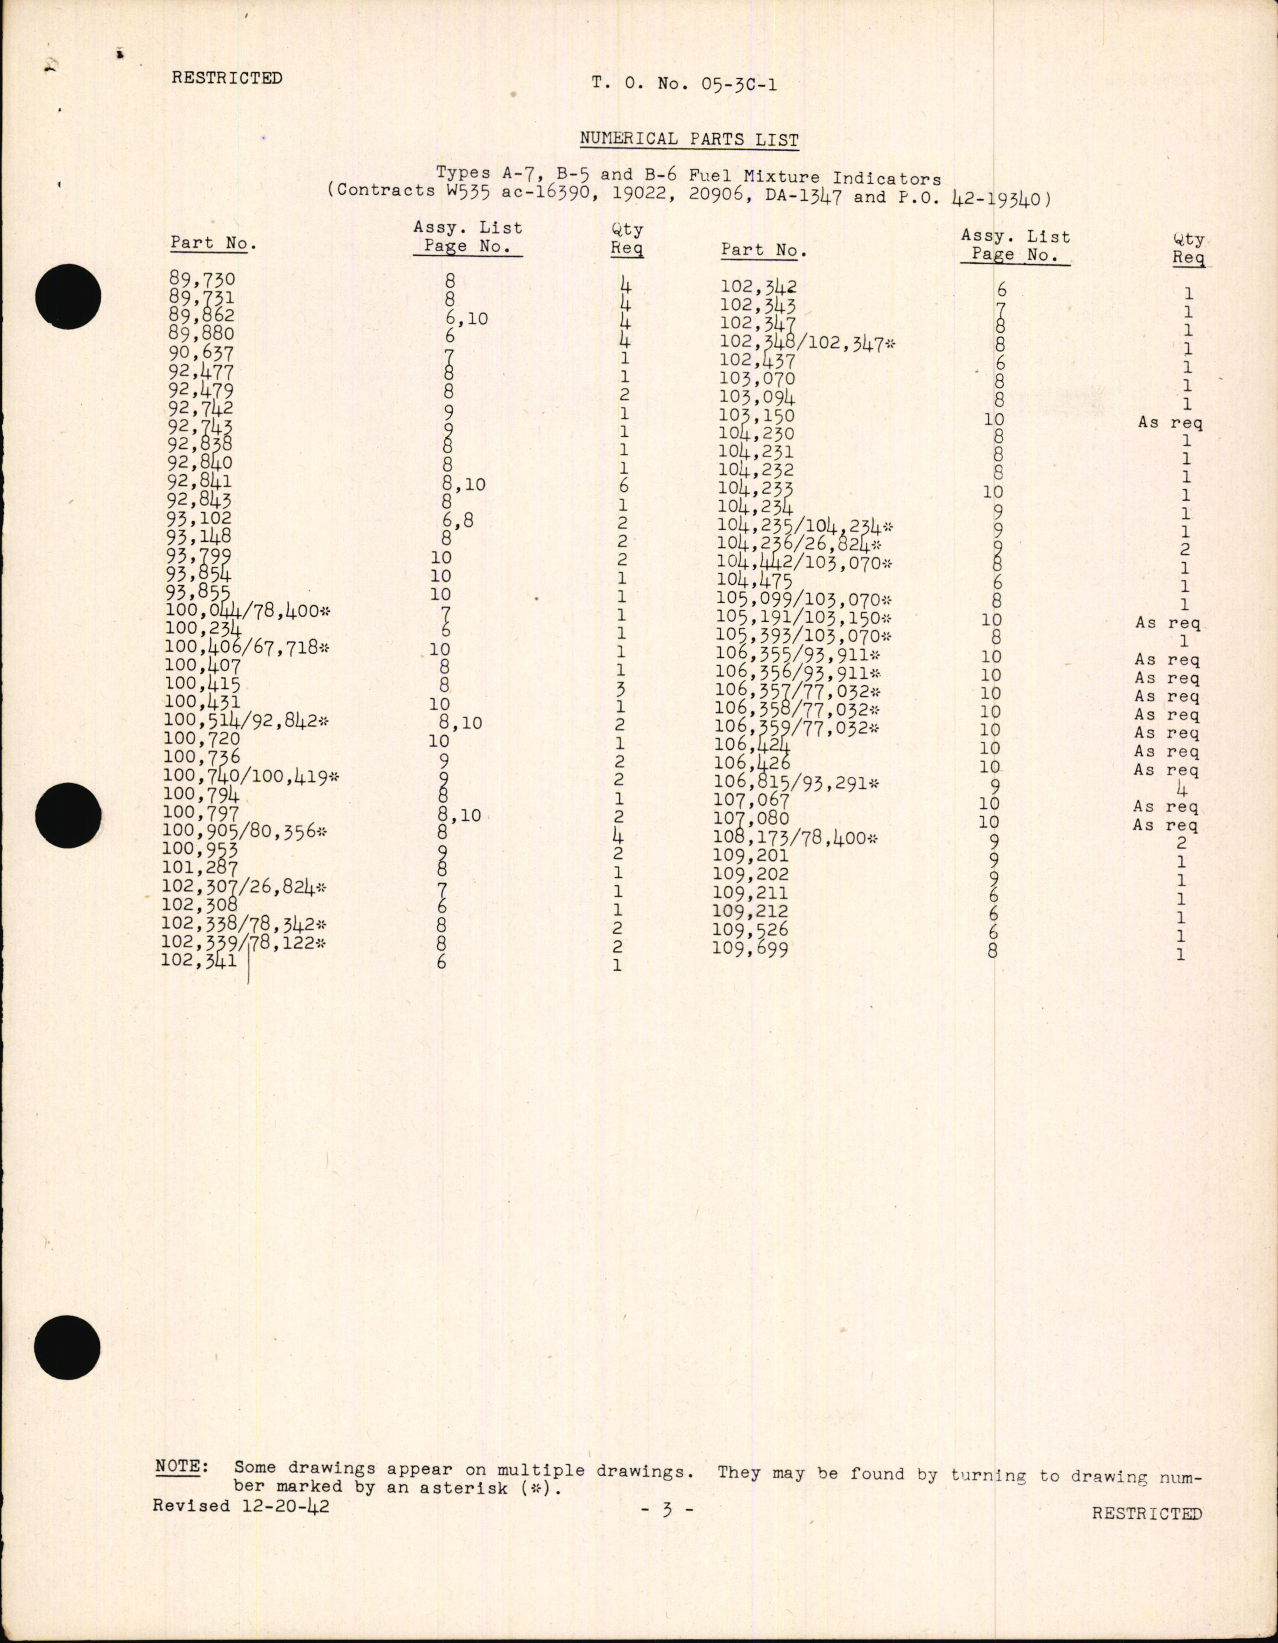 Sample page 5 from AirCorps Library document: Handbook of Instructions with Parts Catalog for Fuel Mixture Indicators